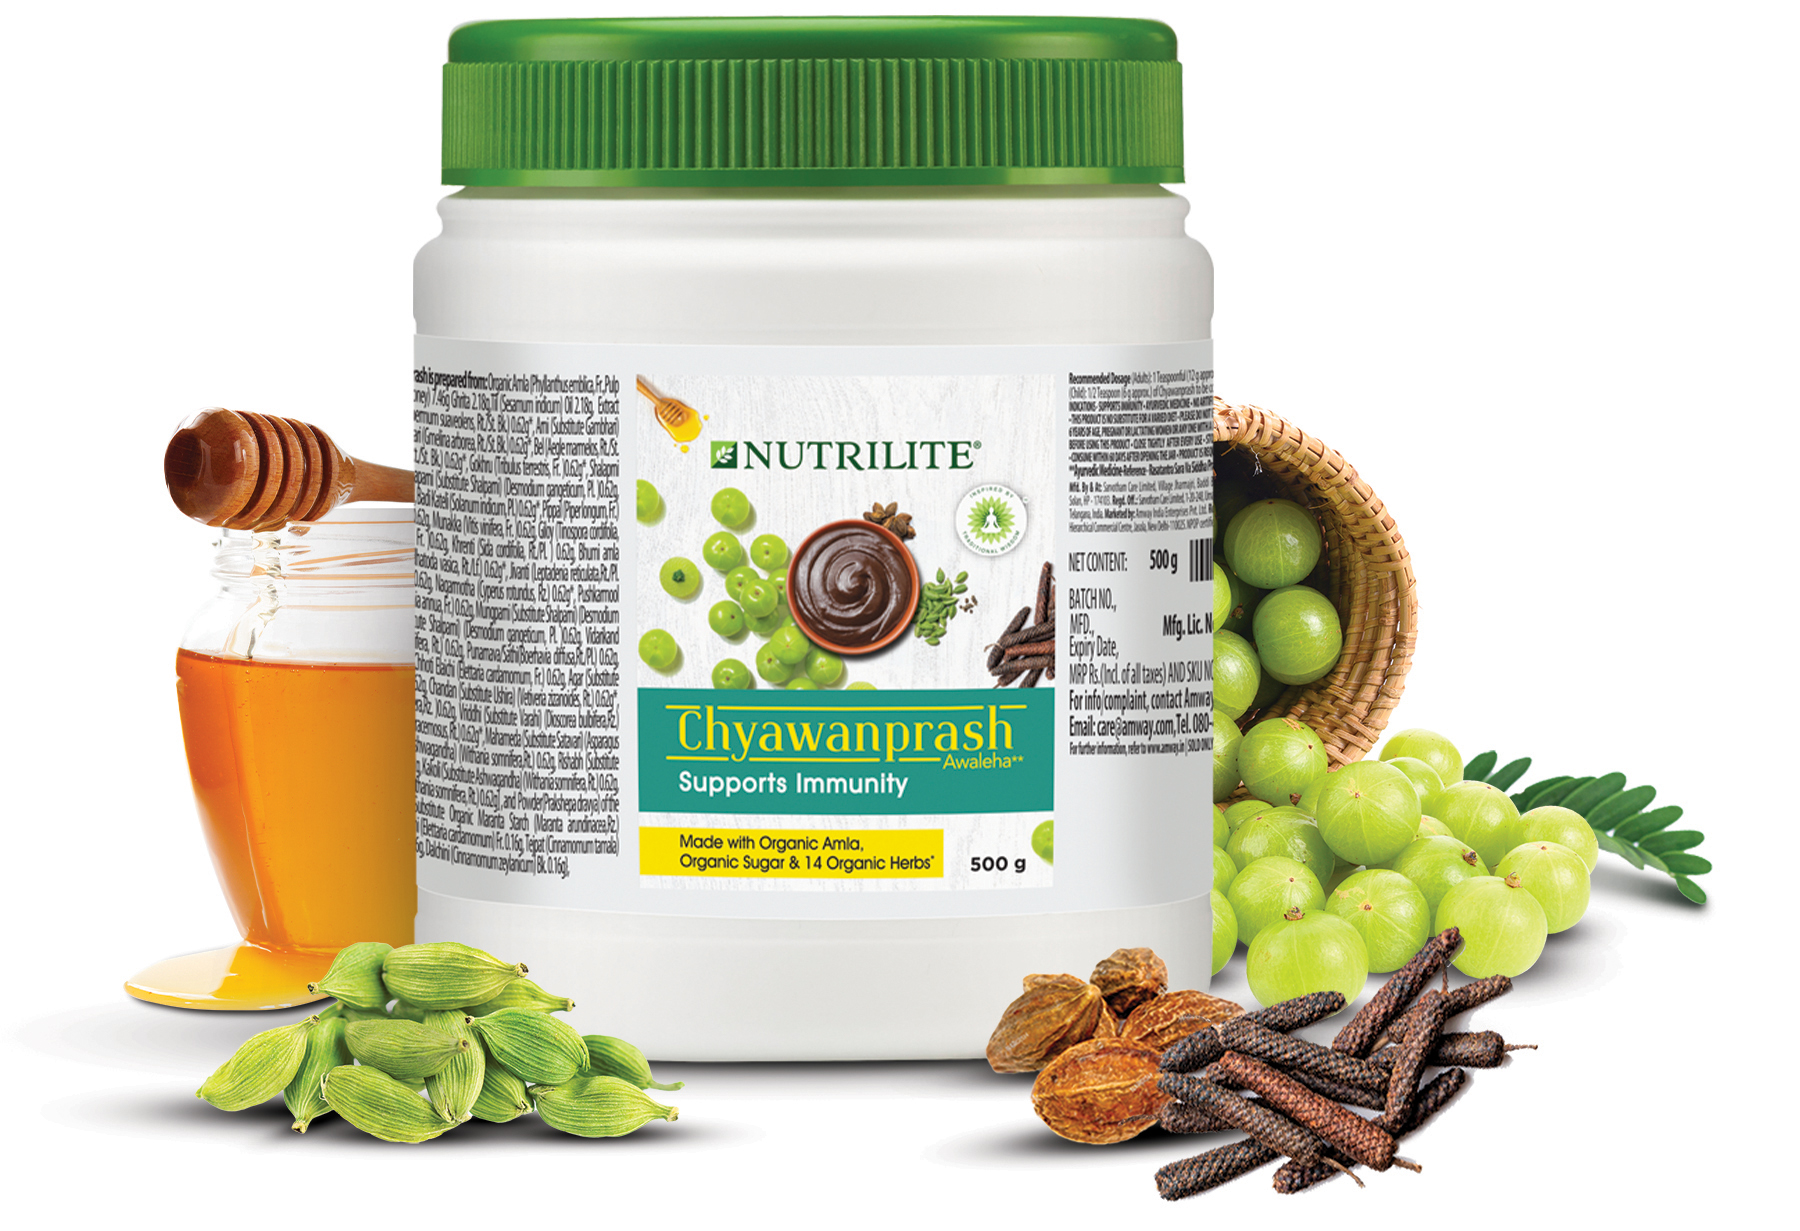 GLOBAL LEADER IN NUTRITION, AMWAY BETS BIG ON AYURVEDA